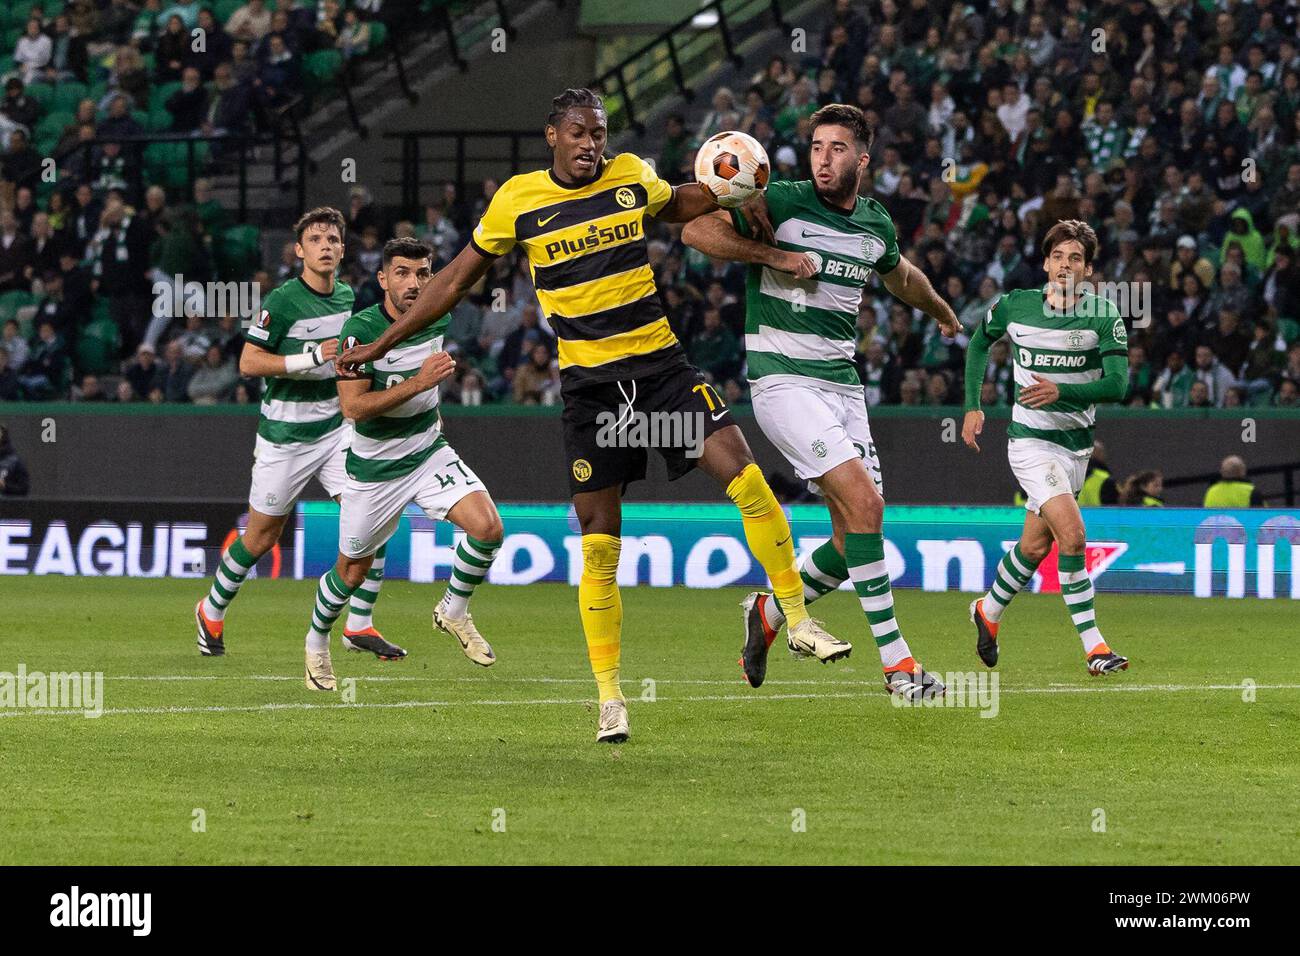 February 22, 2024. Lisbon, Portugal. Young Boys's forward from Portugal Joel Monteiro (77) and Sporting's defender from Portugal Goncalo Inacio (25) in action during the game of the 2nd Leg of the Playoffs for the UEFA Europa League, Sporting vs Young Boys Credit: Alexandre de Sousa/Alamy Live News Stock Photo